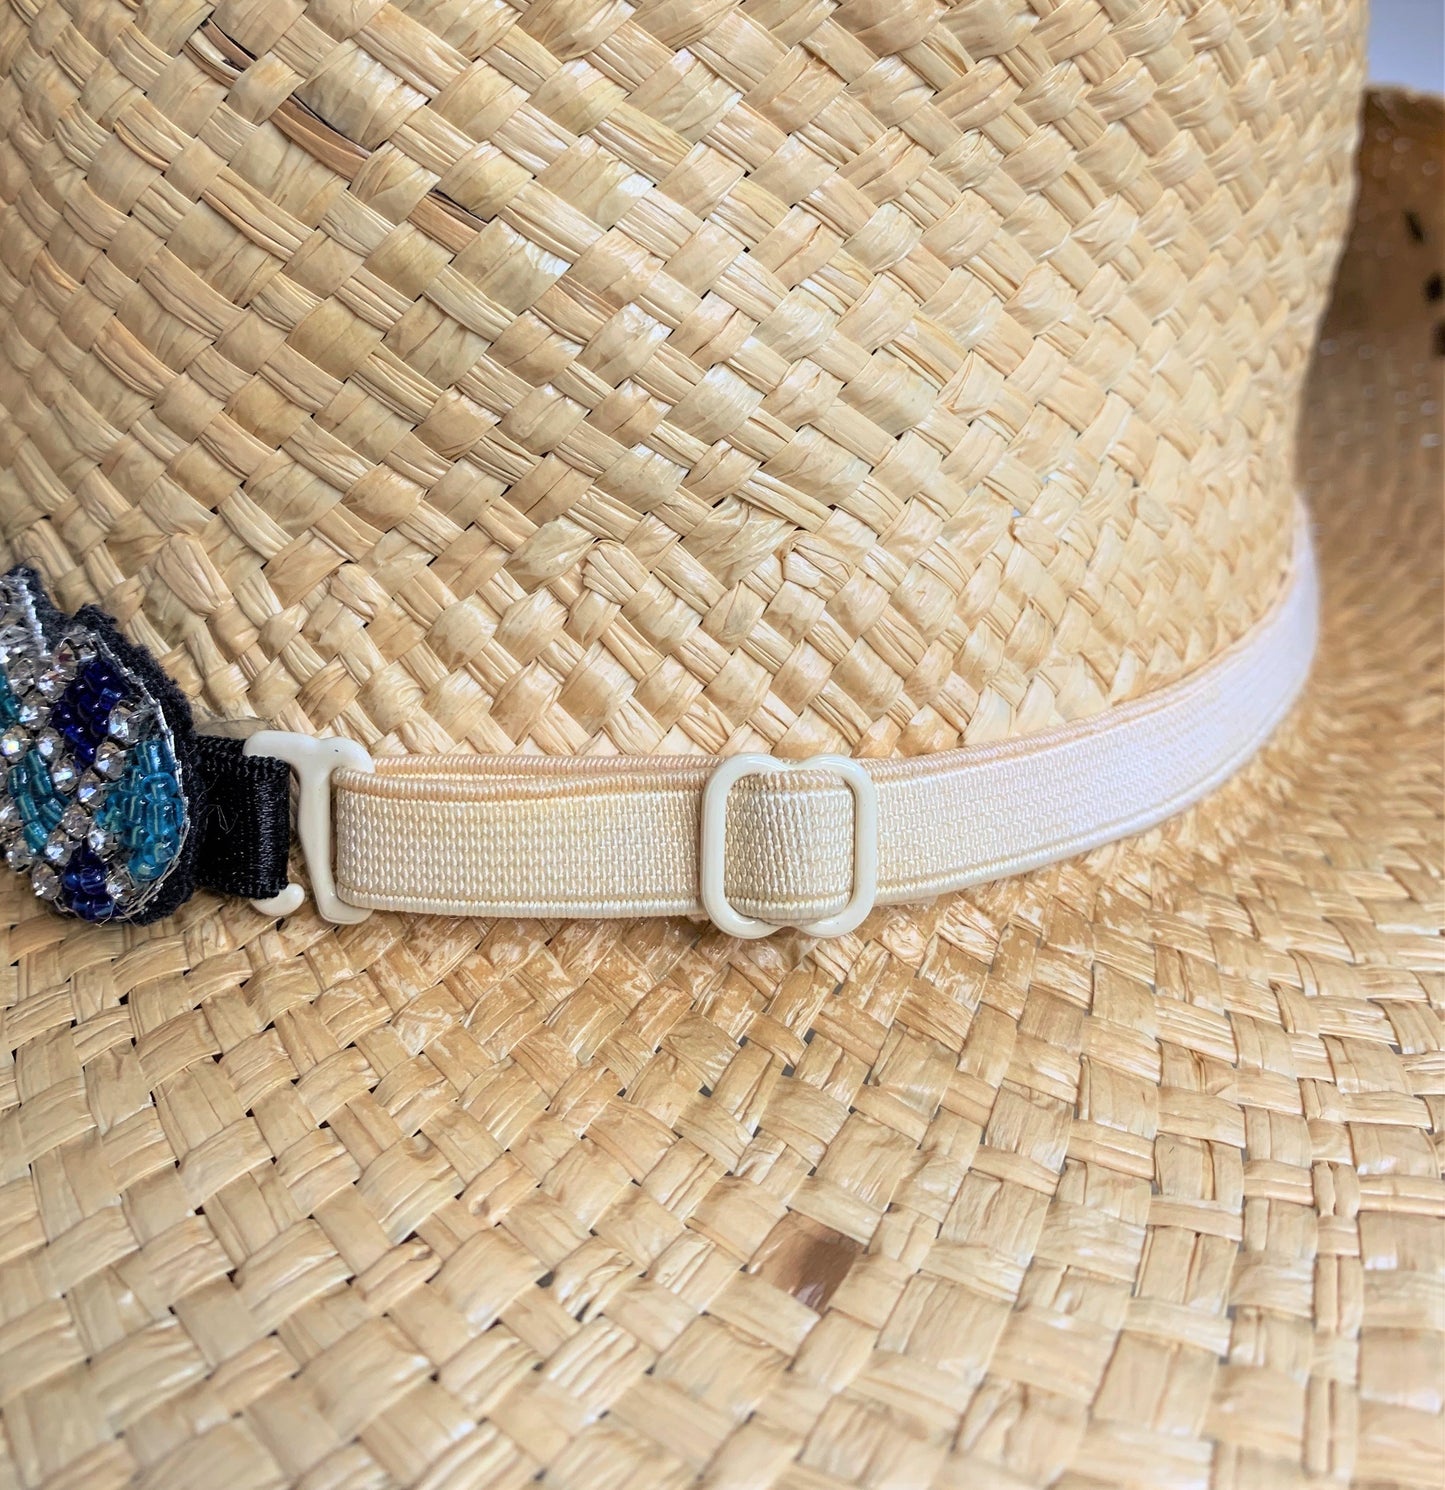 Gray Leather Hat Band